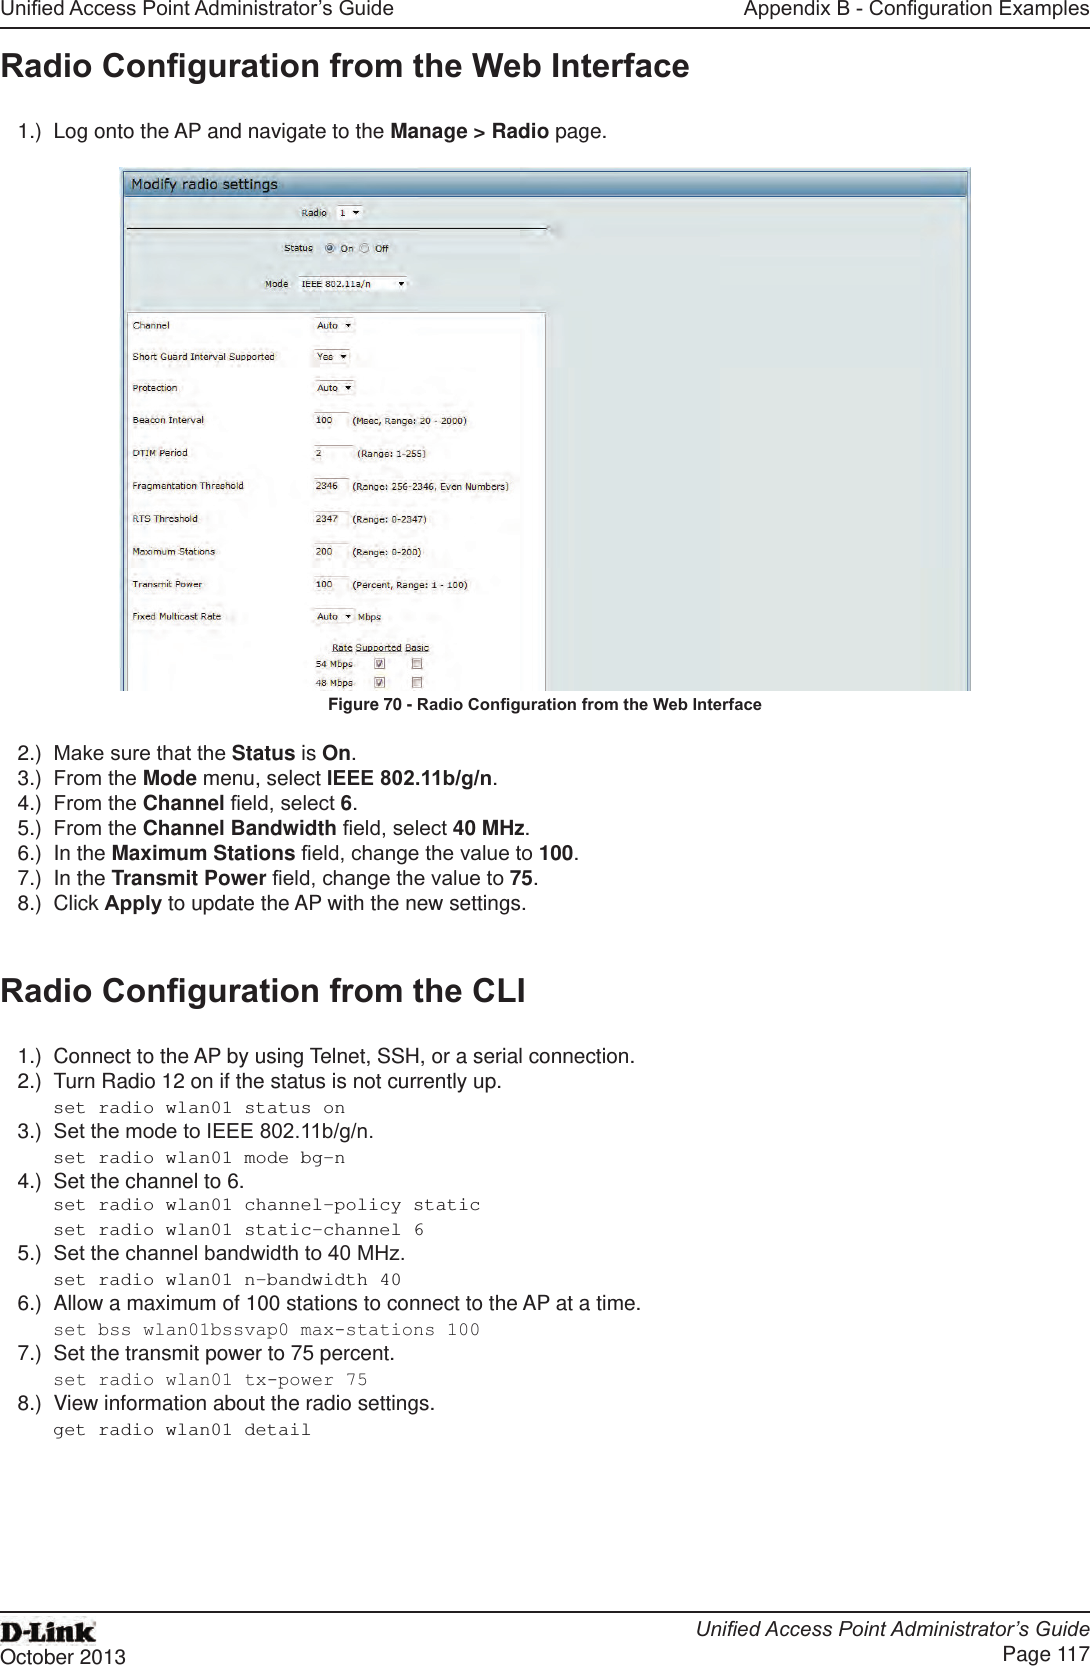 Unied Access Point Administrator’s GuideUnied Access Point Administrator’s GuidePage 117October 2013Appendix B - Conguration ExamplesRadio Conguration from the Web Interface1.)  Log onto the AP and navigate to the Manage &gt; Radio page.Figure 70 - Radio Conguration from the Web Interface2.)  Make sure that the Status is On.3.)  From the Mode menu, select IEEE 802.11b/g/n.4.)  From the Channel eld, select 6. 5.)  From the Channel Bandwidth eld, select 40 MHz.6.)  In the Maximum Stations eld, change the value to 100.7.)  In the Transmit Power eld, change the value to 75.8.)  Click Apply to update the AP with the new settings.Radio Conguration from the CLI1.)  Connect to the AP by using Telnet, SSH, or a serial connection.2.)  Turn Radio 12 on if the status is not currently up.set radio wlan01 status on3.)  Set the mode to IEEE 802.11b/g/n.set radio wlan01 mode bg-n4.)  Set the channel to 6. set radio wlan01 channel-policy staticset radio wlan01 static-channel 65.)  Set the channel bandwidth to 40 MHz.set radio wlan01 n-bandwidth 406.)  Allow a maximum of 100 stations to connect to the AP at a time.set bss wlan01bssvap0 max-stations 1007.)  Set the transmit power to 75 percent.set radio wlan01 tx-power 758.)  View information about the radio settings.get radio wlan01 detail